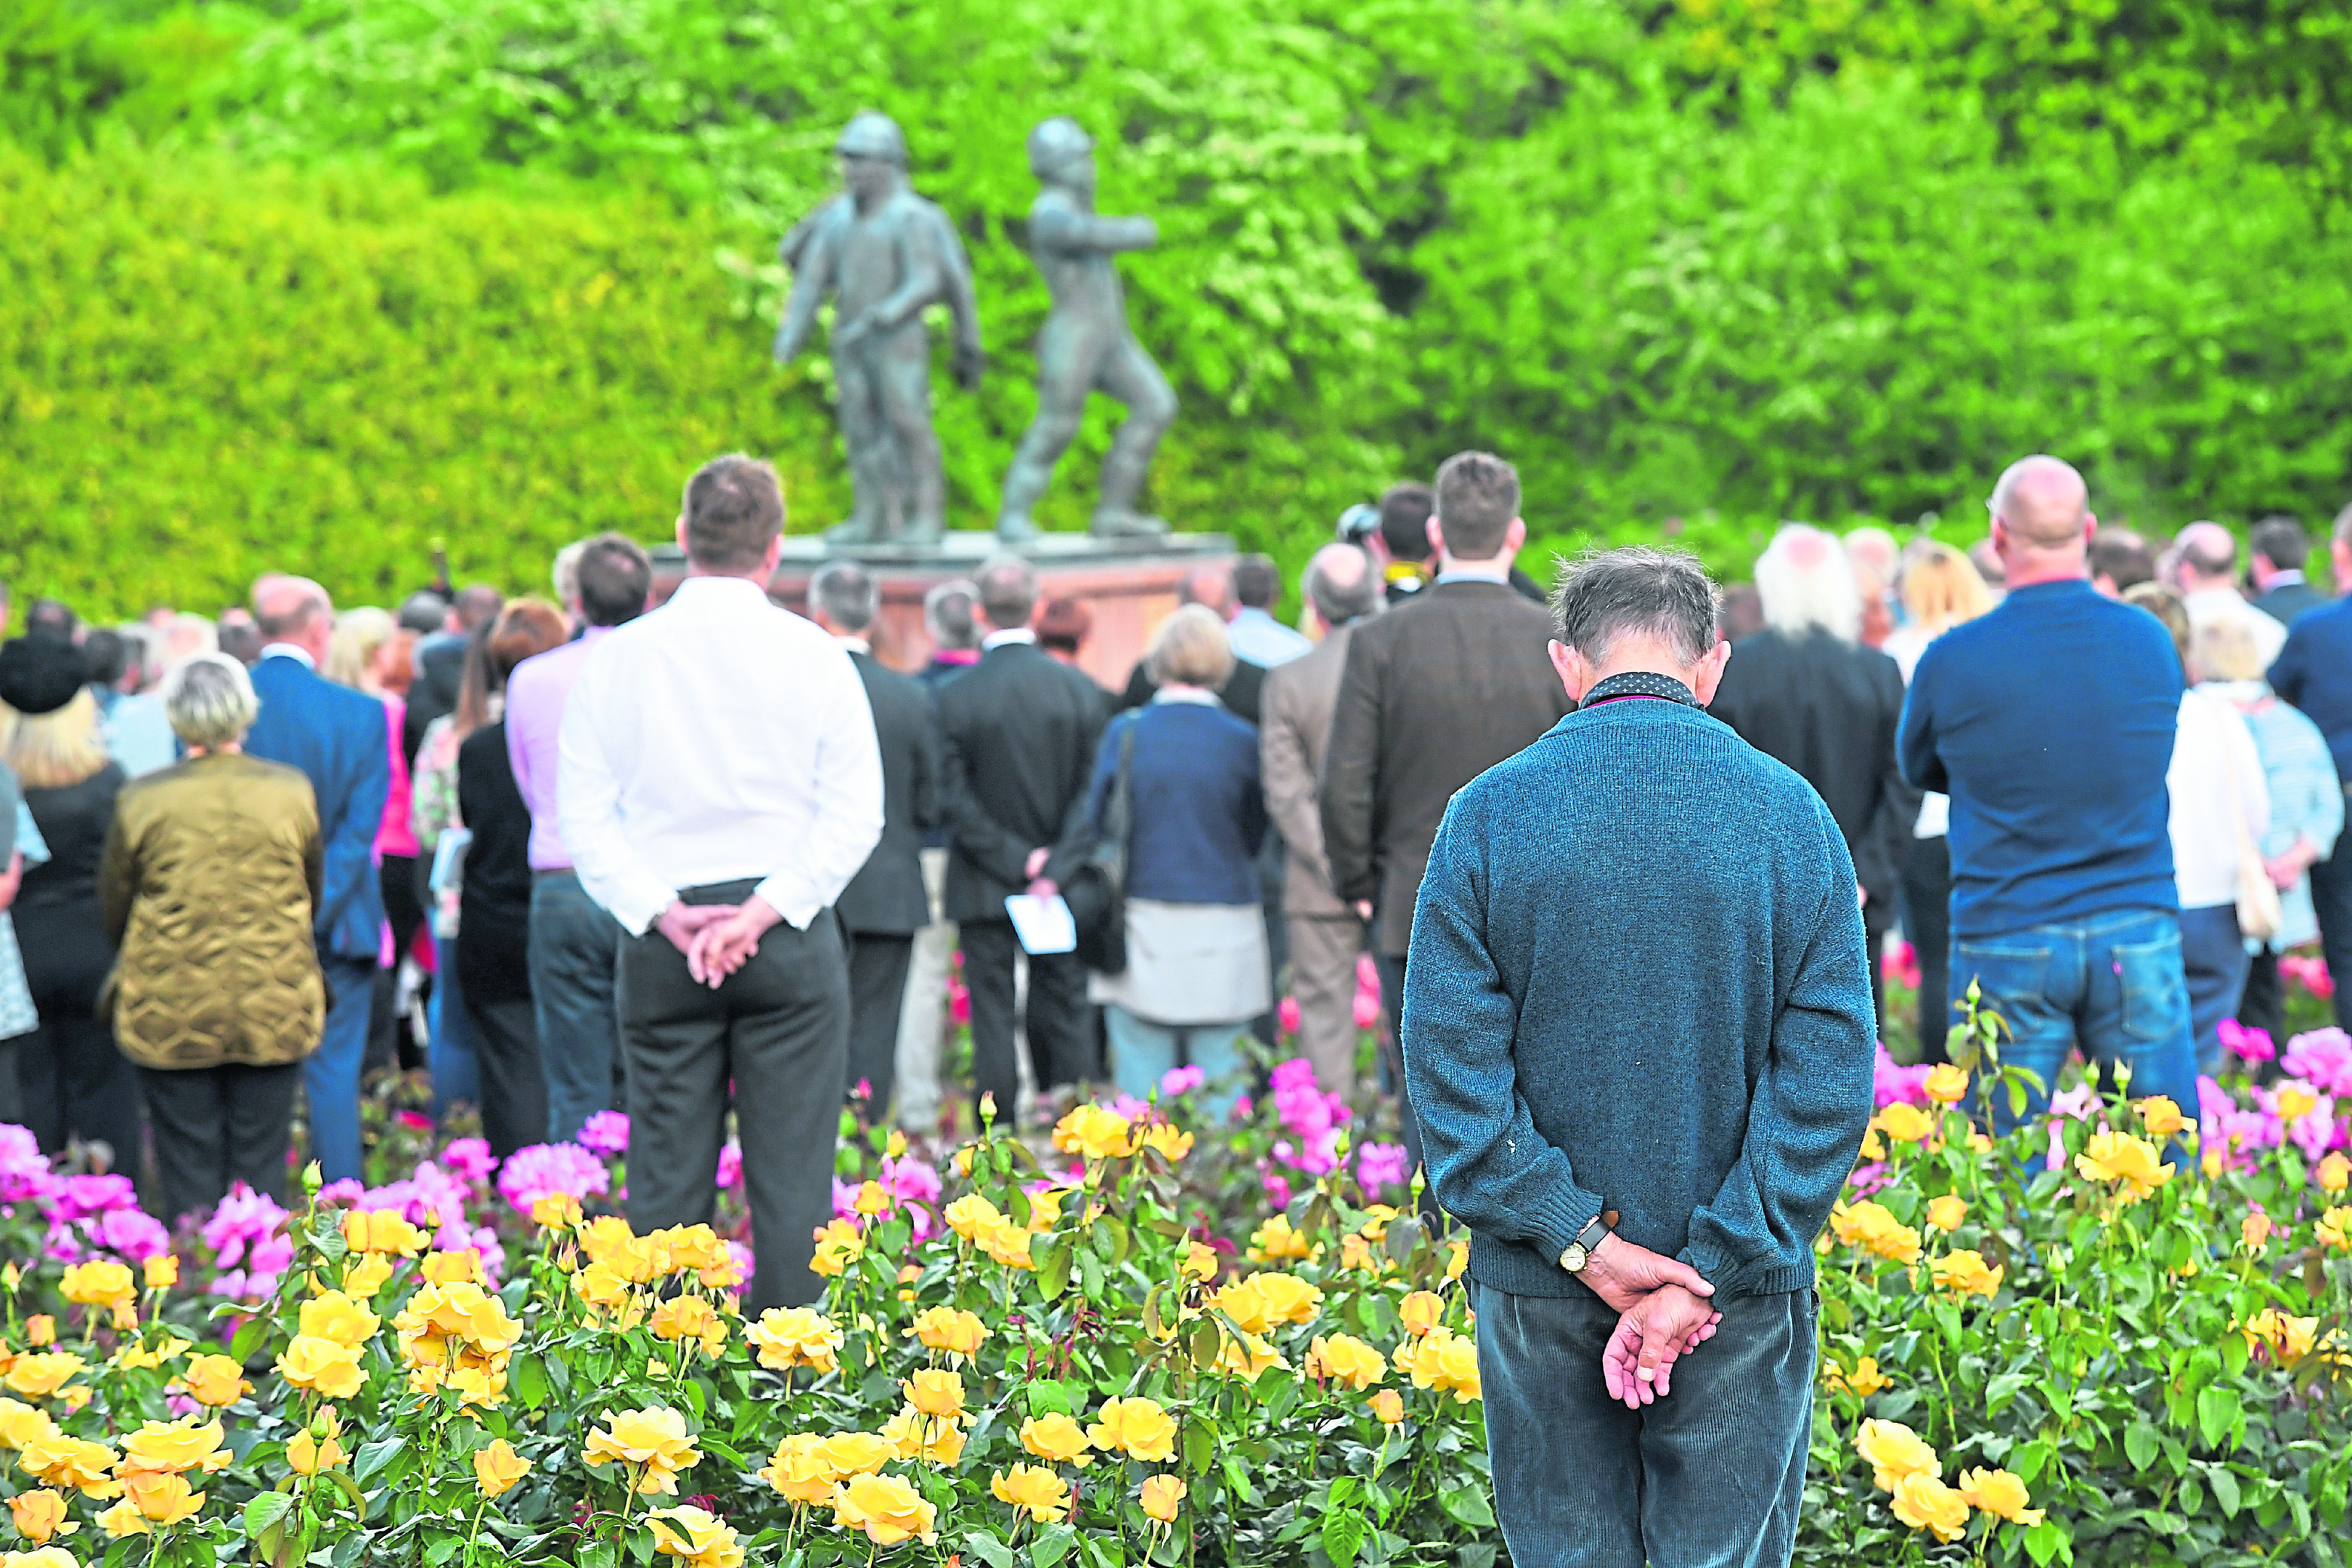 A special ceremony was held in July to mark 30 years since Piper Alpha.